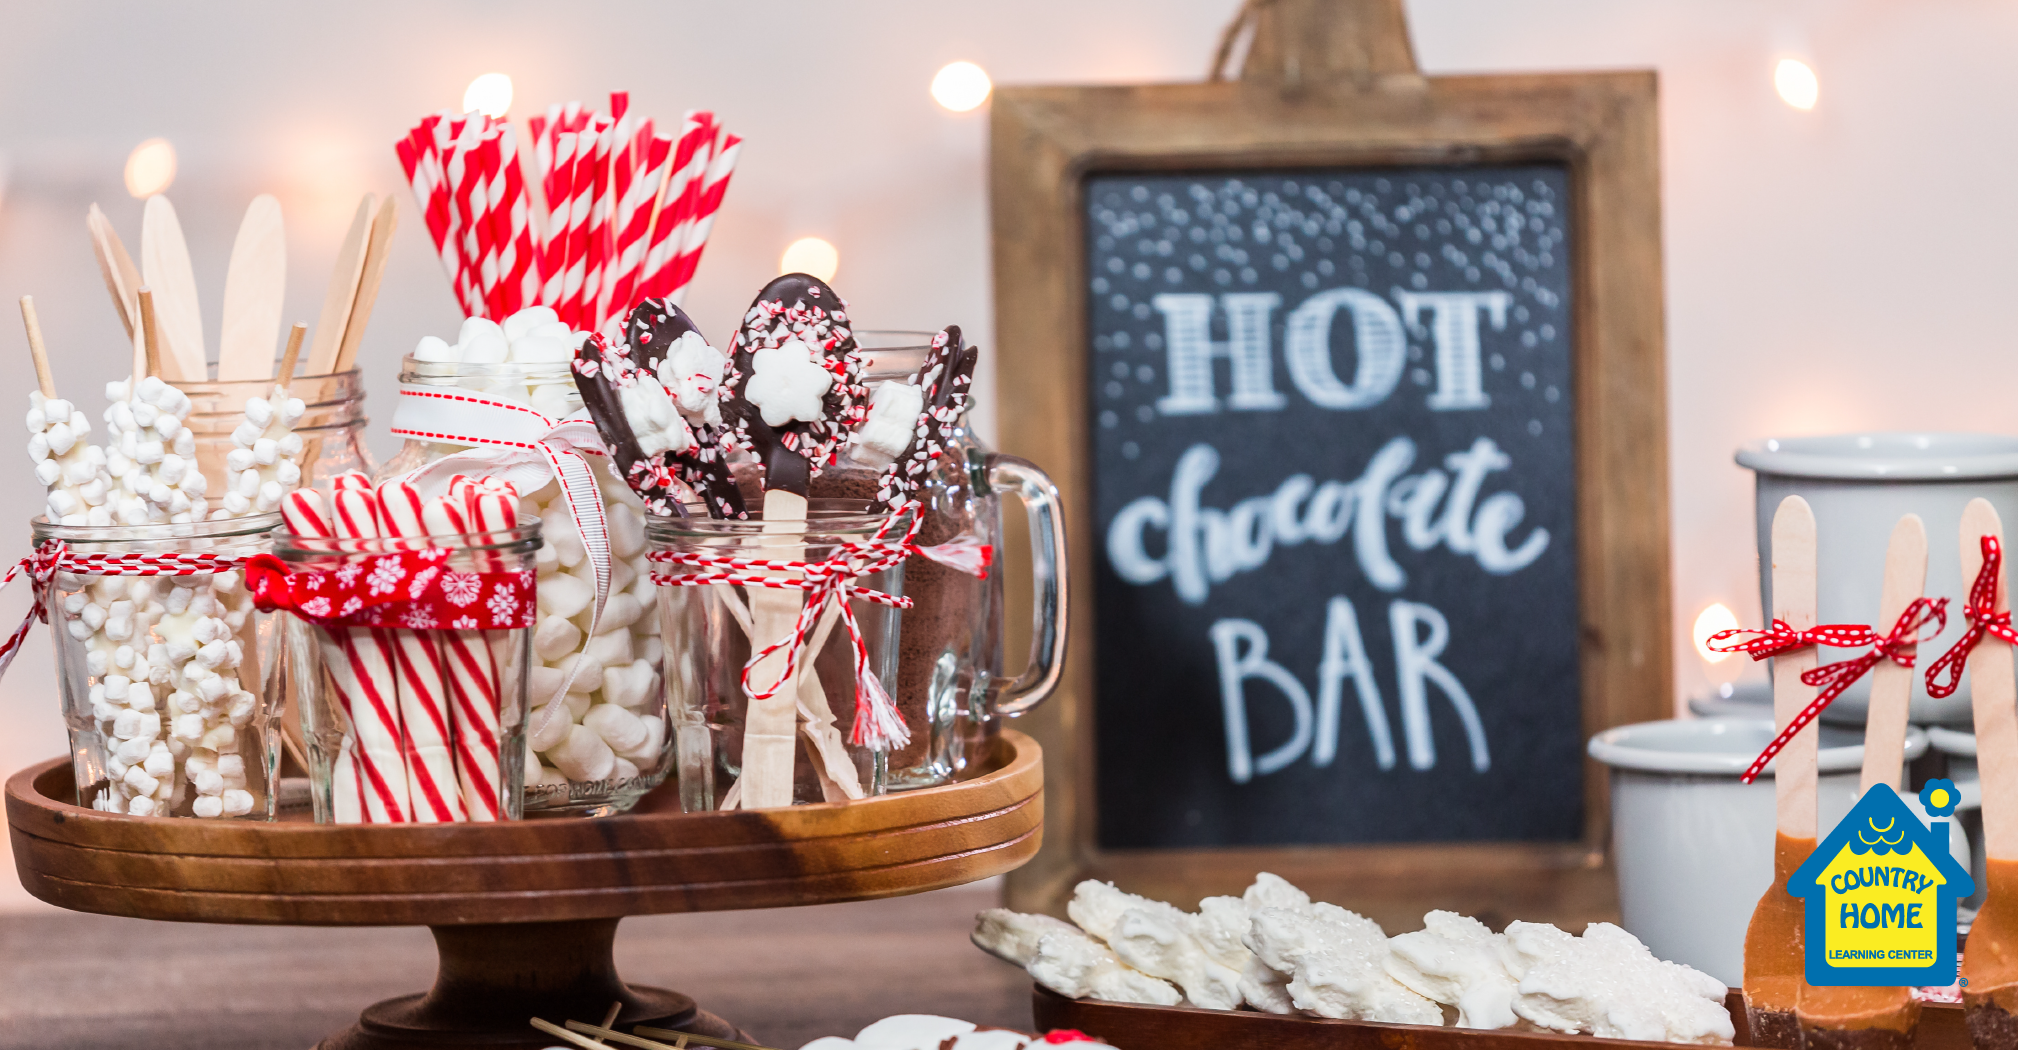 Hot Chocolate Toppings - For a DIY Hot Chocolate Bar